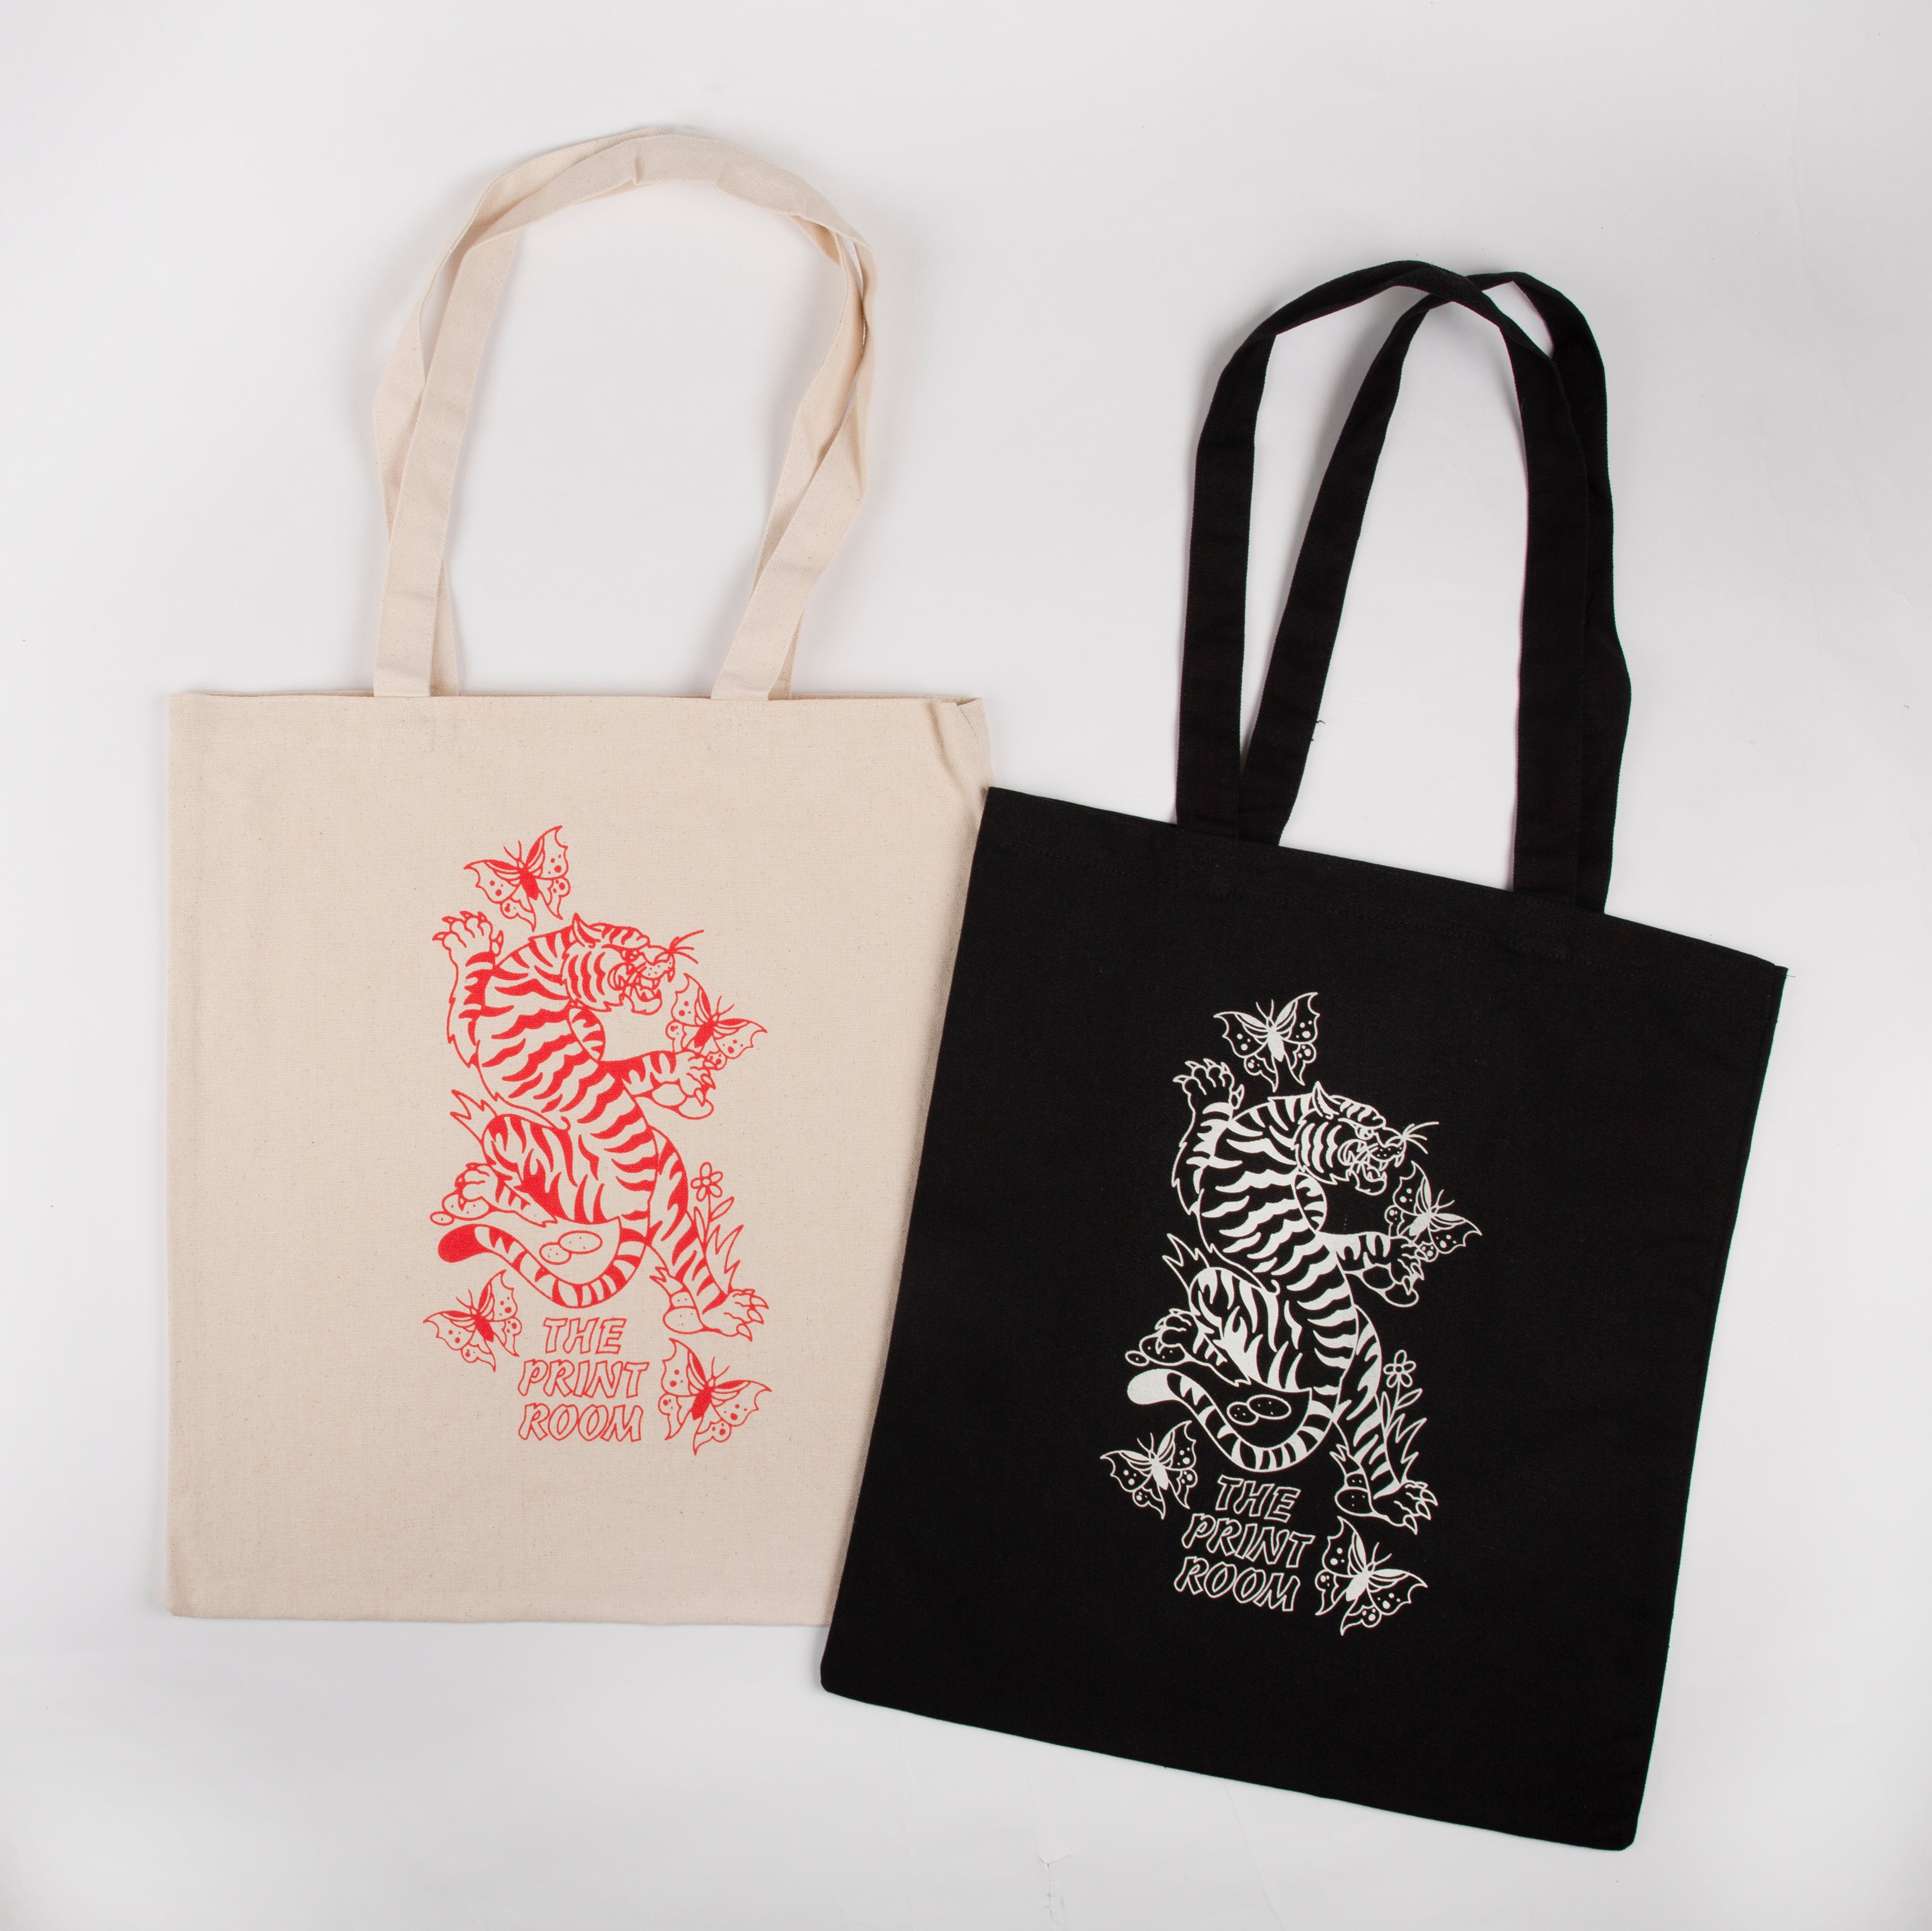 Custom branded tote bags: Our top tips to make your bags pop